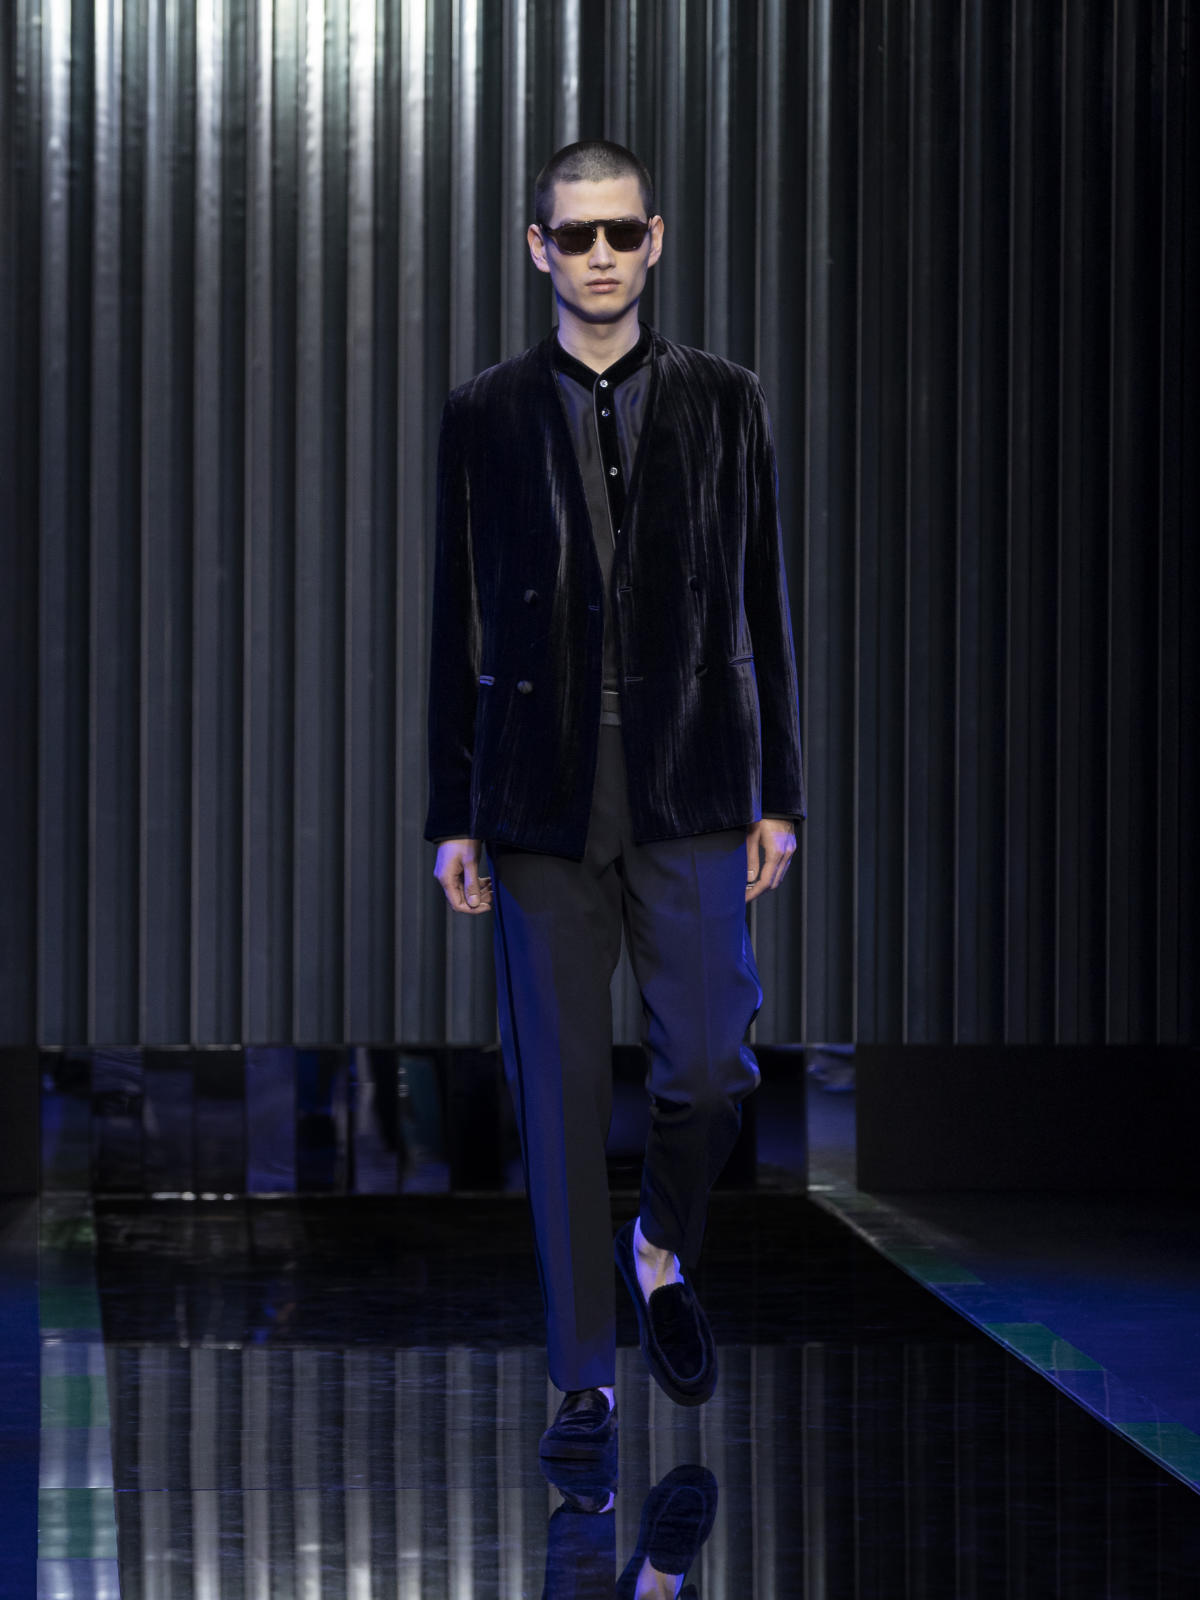 Giorgio Armani Presents Its New Men's And Women's Autumn/Winter 2022/23 Collection: Signs Of Light